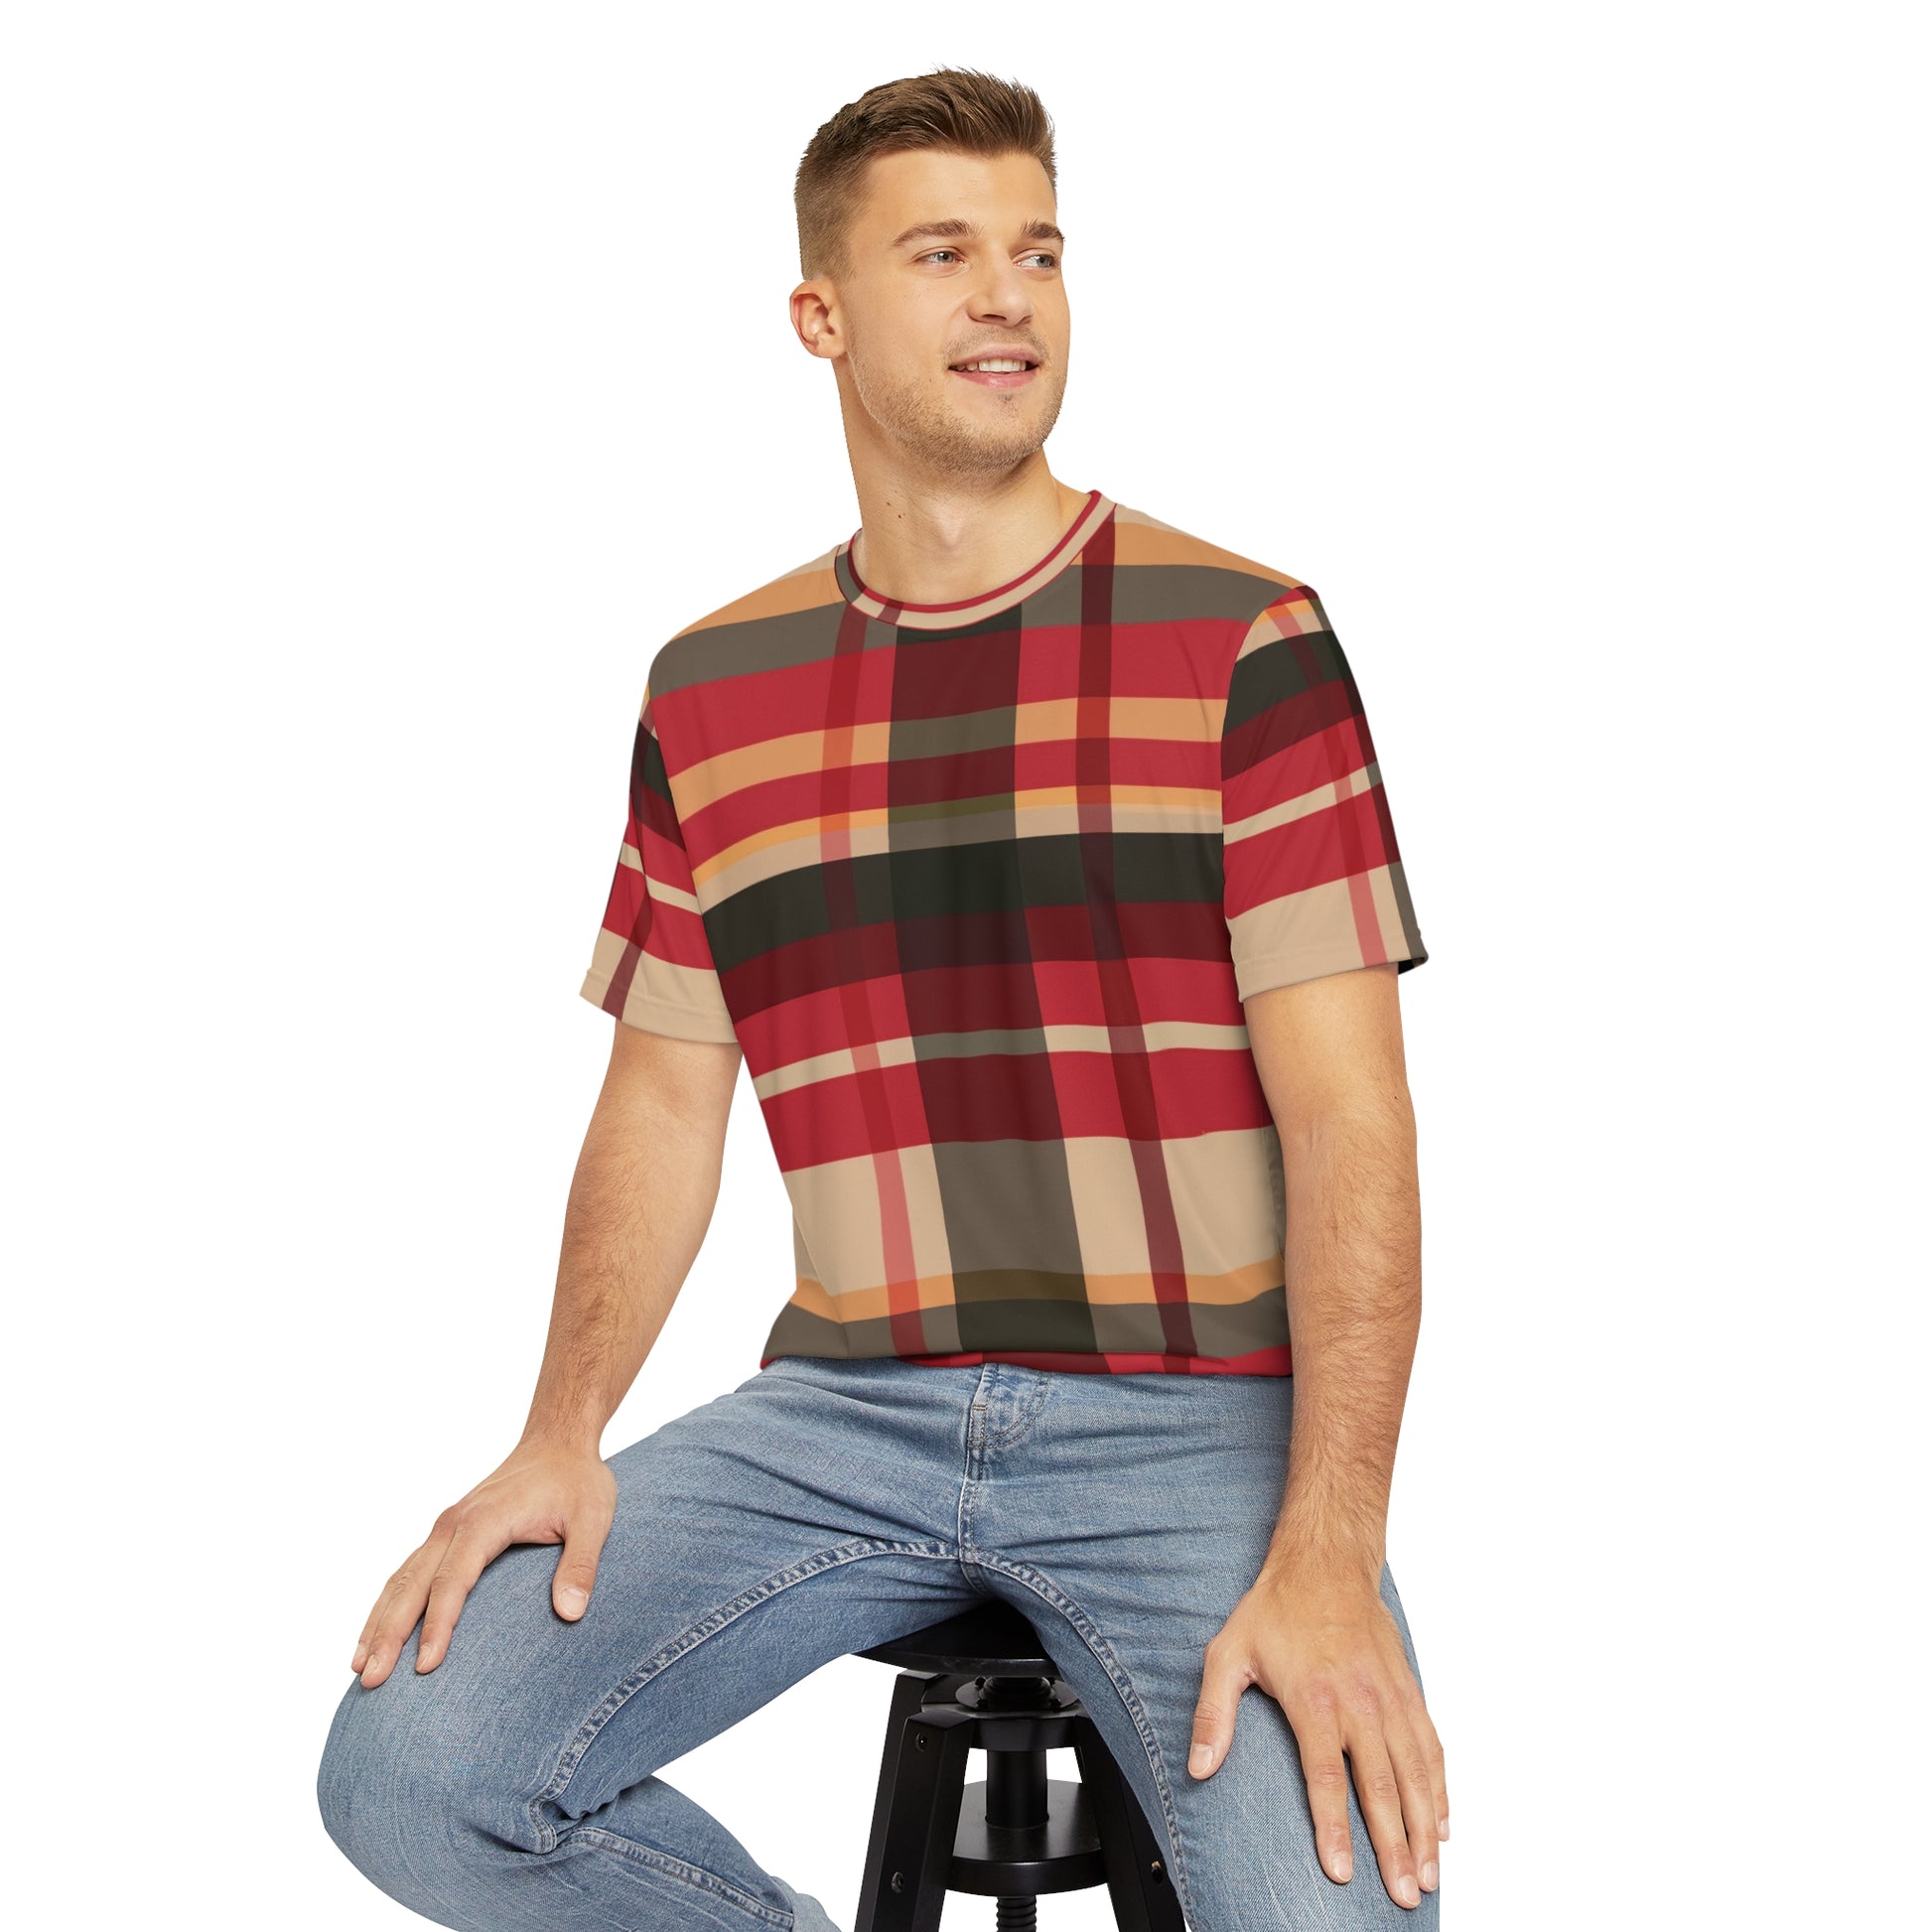 Front view of the McCloud Mist Tartan Crewneck Pullover Short-Sleeved All-Over Print Shirt red black and beige plaid pattern worn by a white male sitting on a stool chair, paired with casual denim jeans